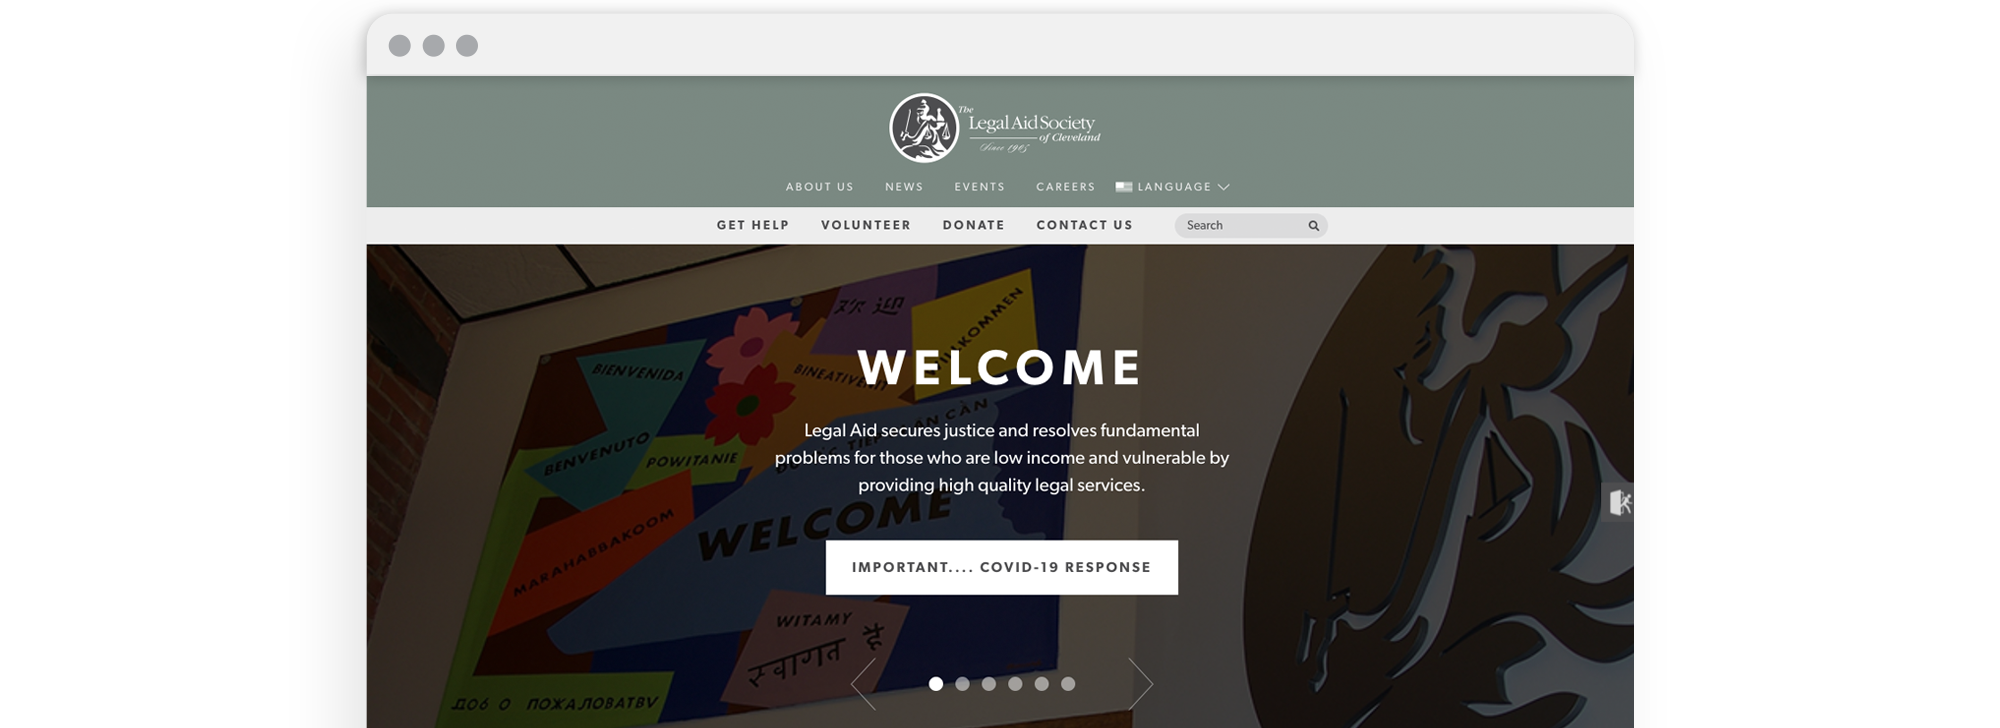 Legal Aid Society of Cleveland Website Design